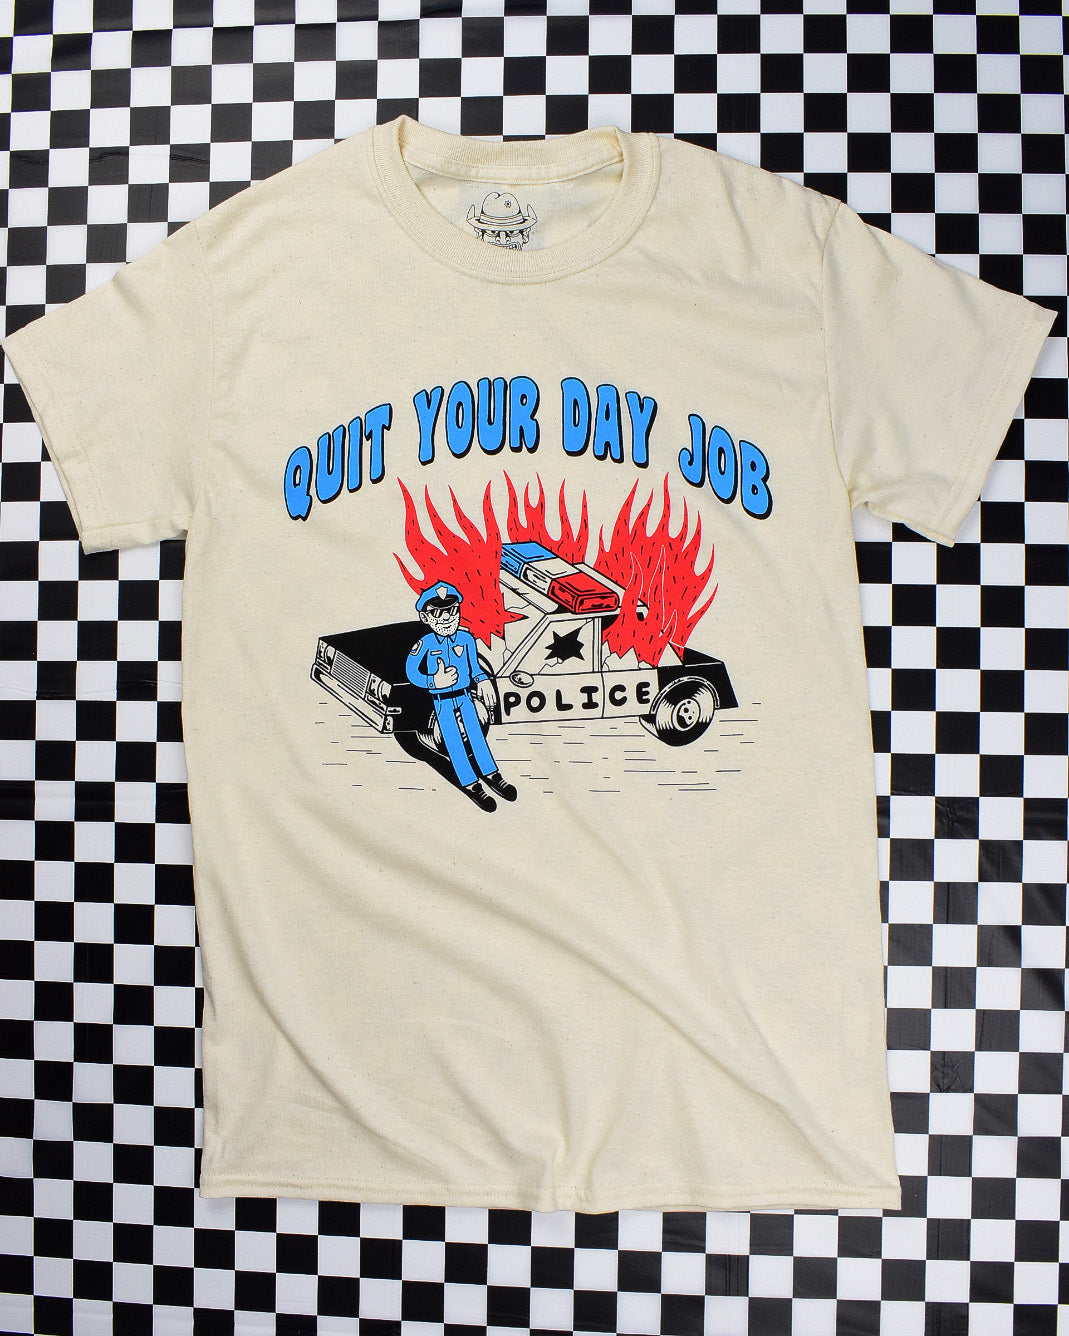 Flaming cop car on natural short-sleeve t-shirt that reads Quit Your Day Job designed by Crocodile Jackson.